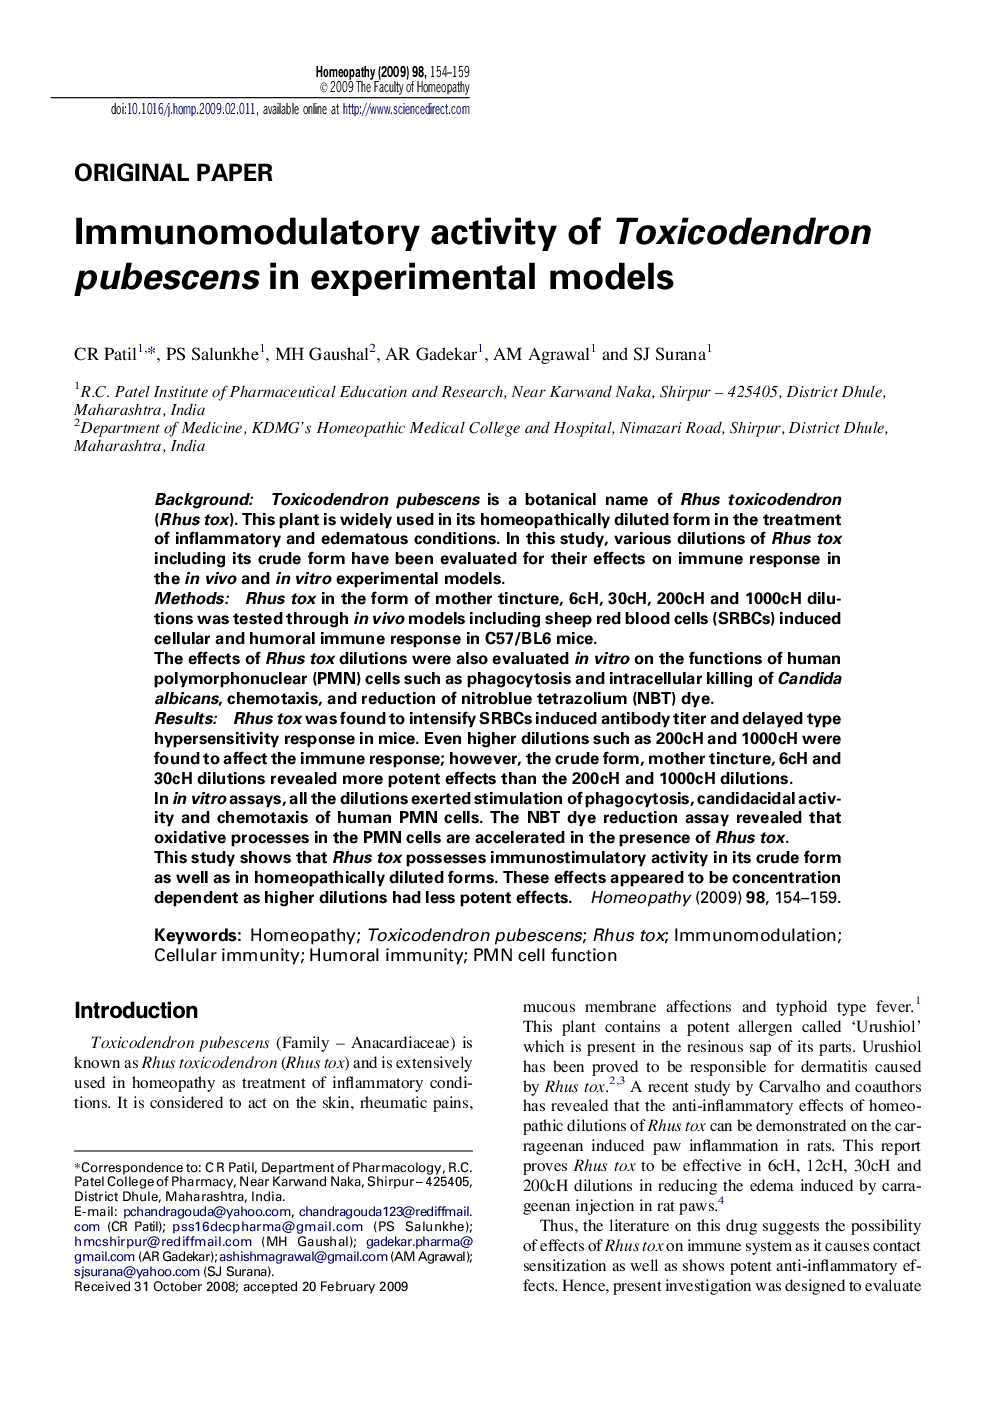 Immunomodulatory activity of Toxicodendron pubescens in experimental models